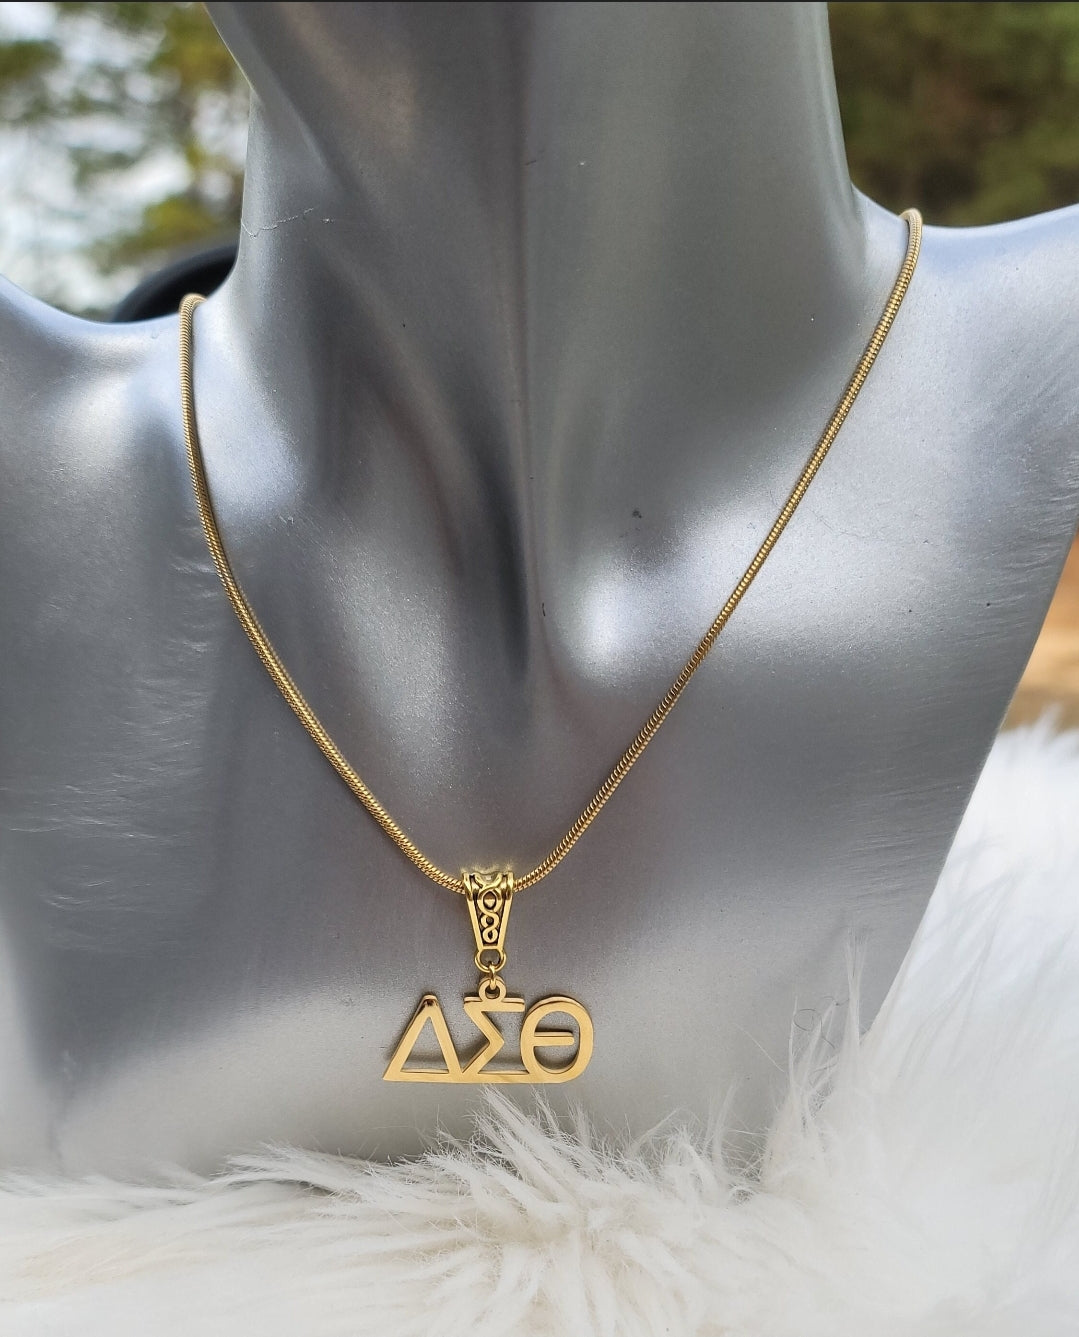 Delta Sigma Theta (Large Font) Greek Letter Sorority Necklace Available in Silver and Gold